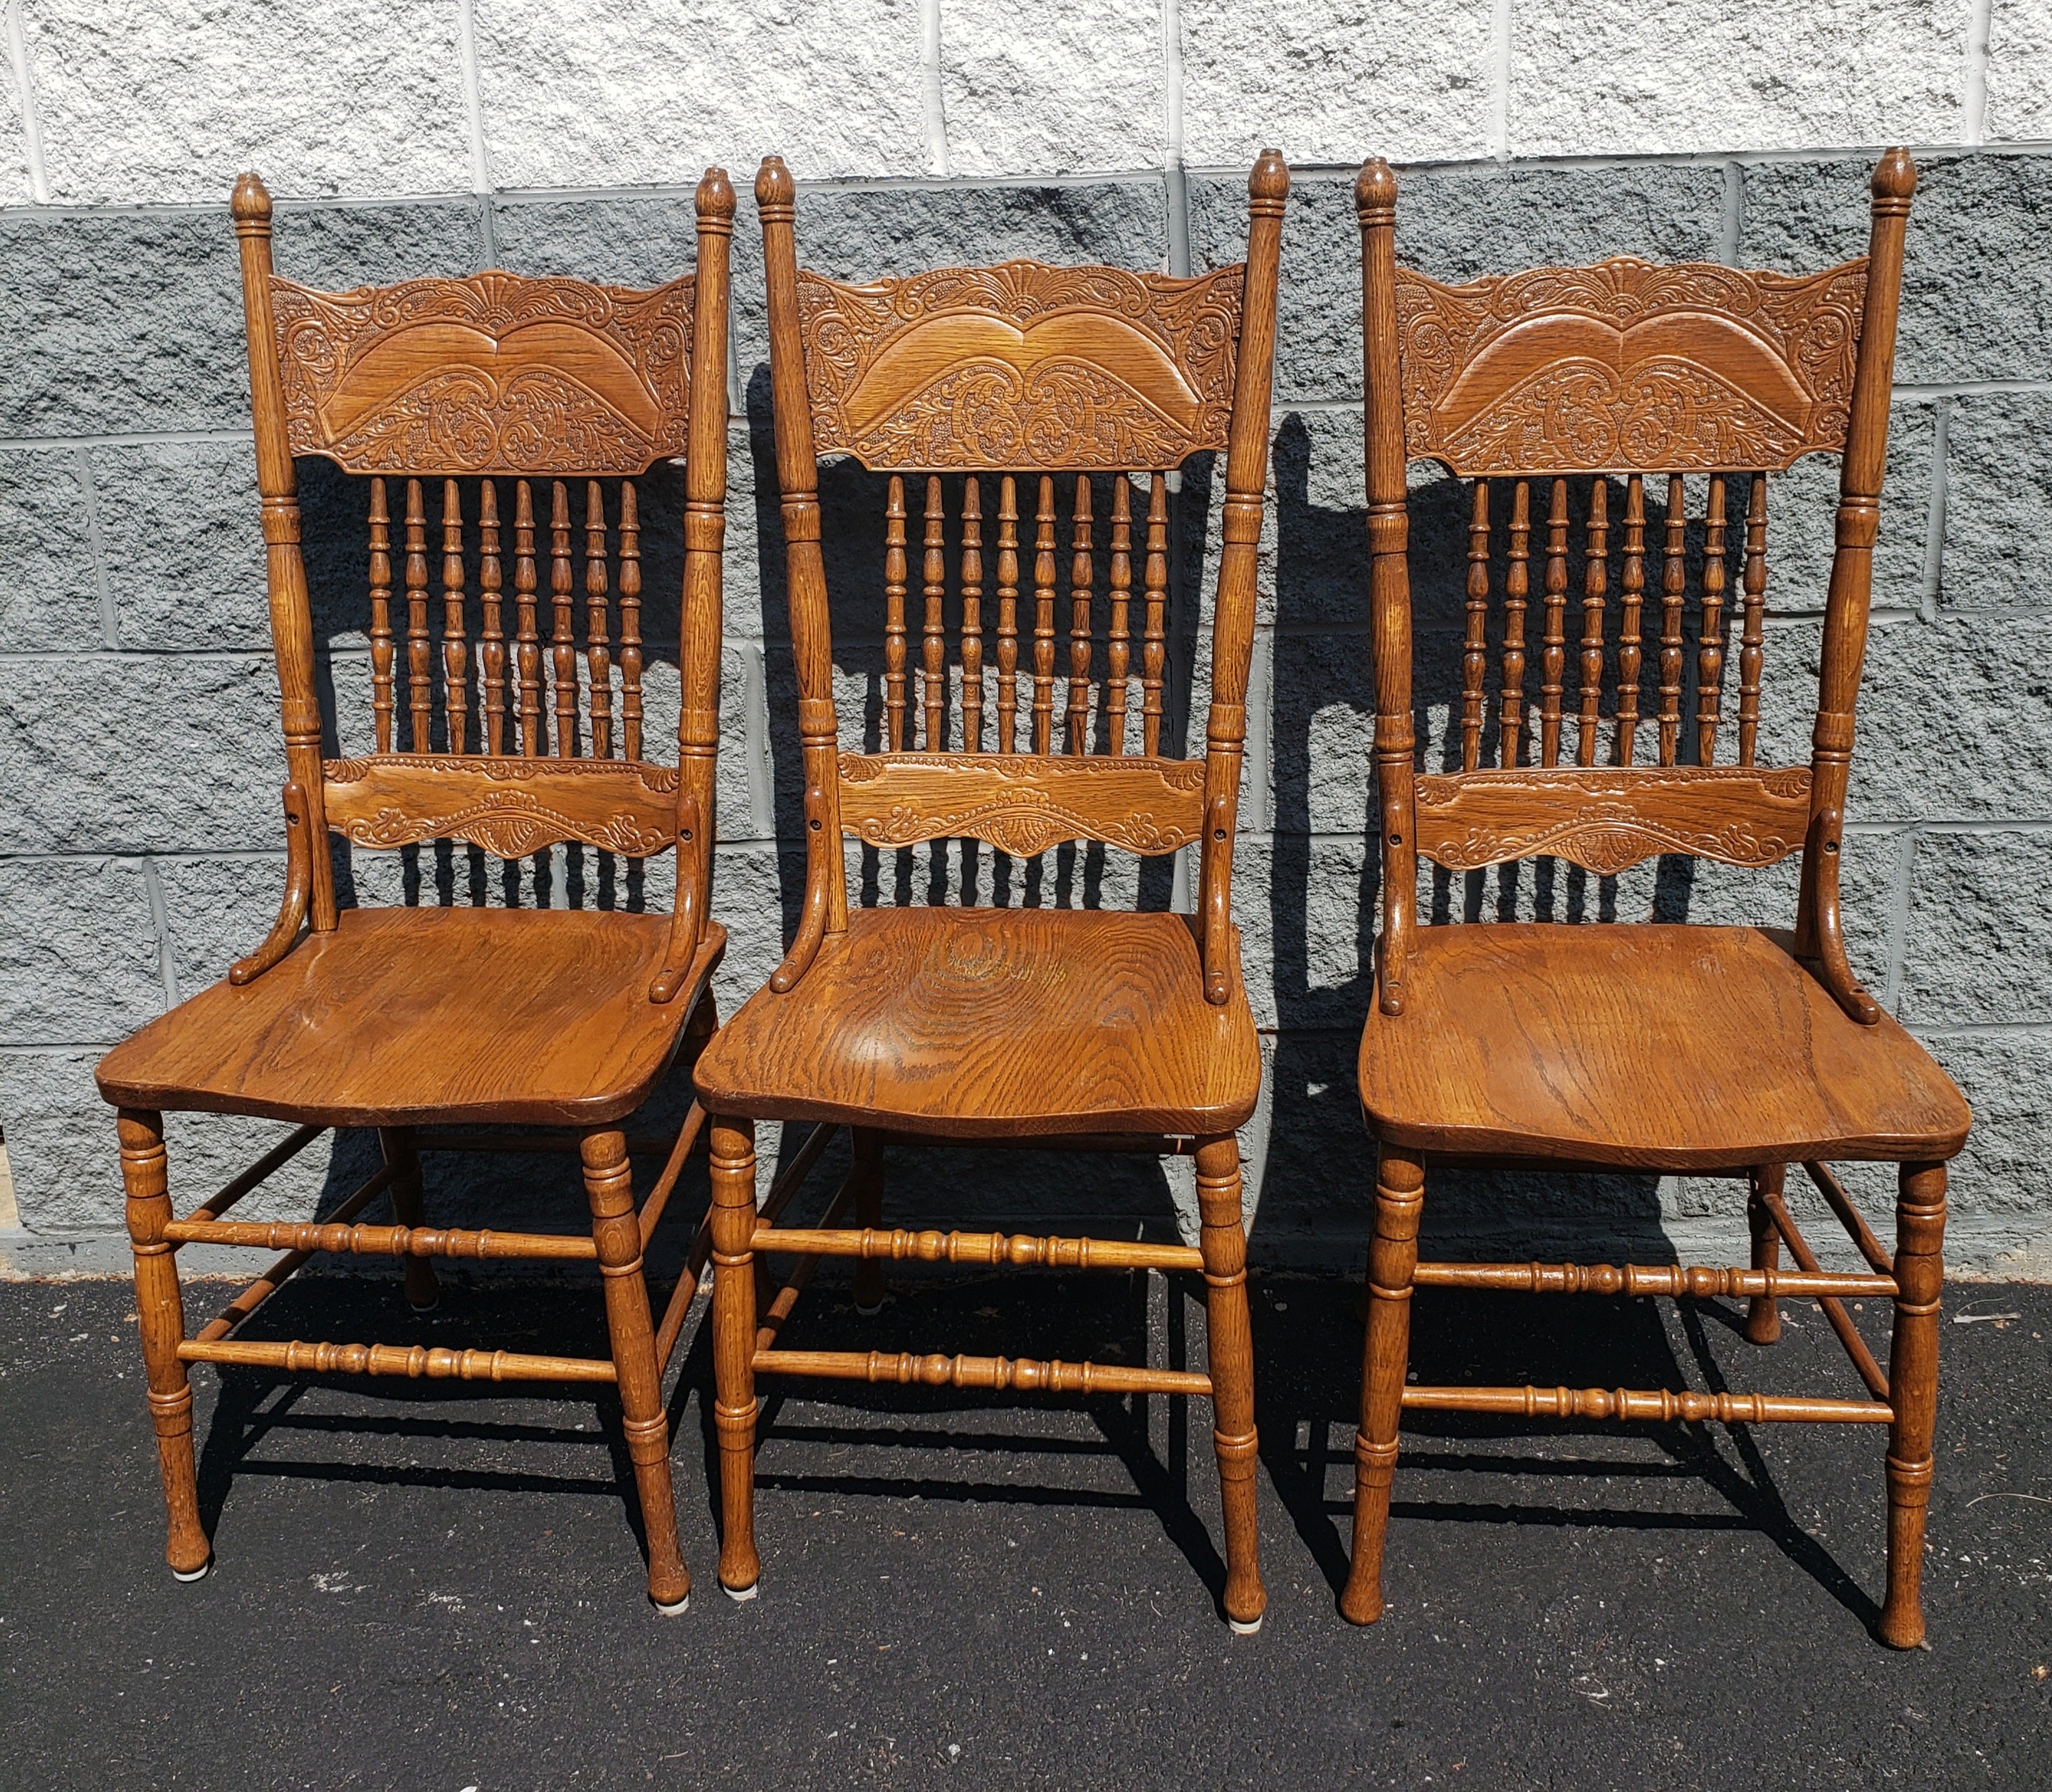 A beautiful set of 3 Vintage Amish Oak Country Pressed Back Spindle chairs. Beautiful carvings on the upper back above a set of 8 spindles. Good vintage condition.
Measures 17